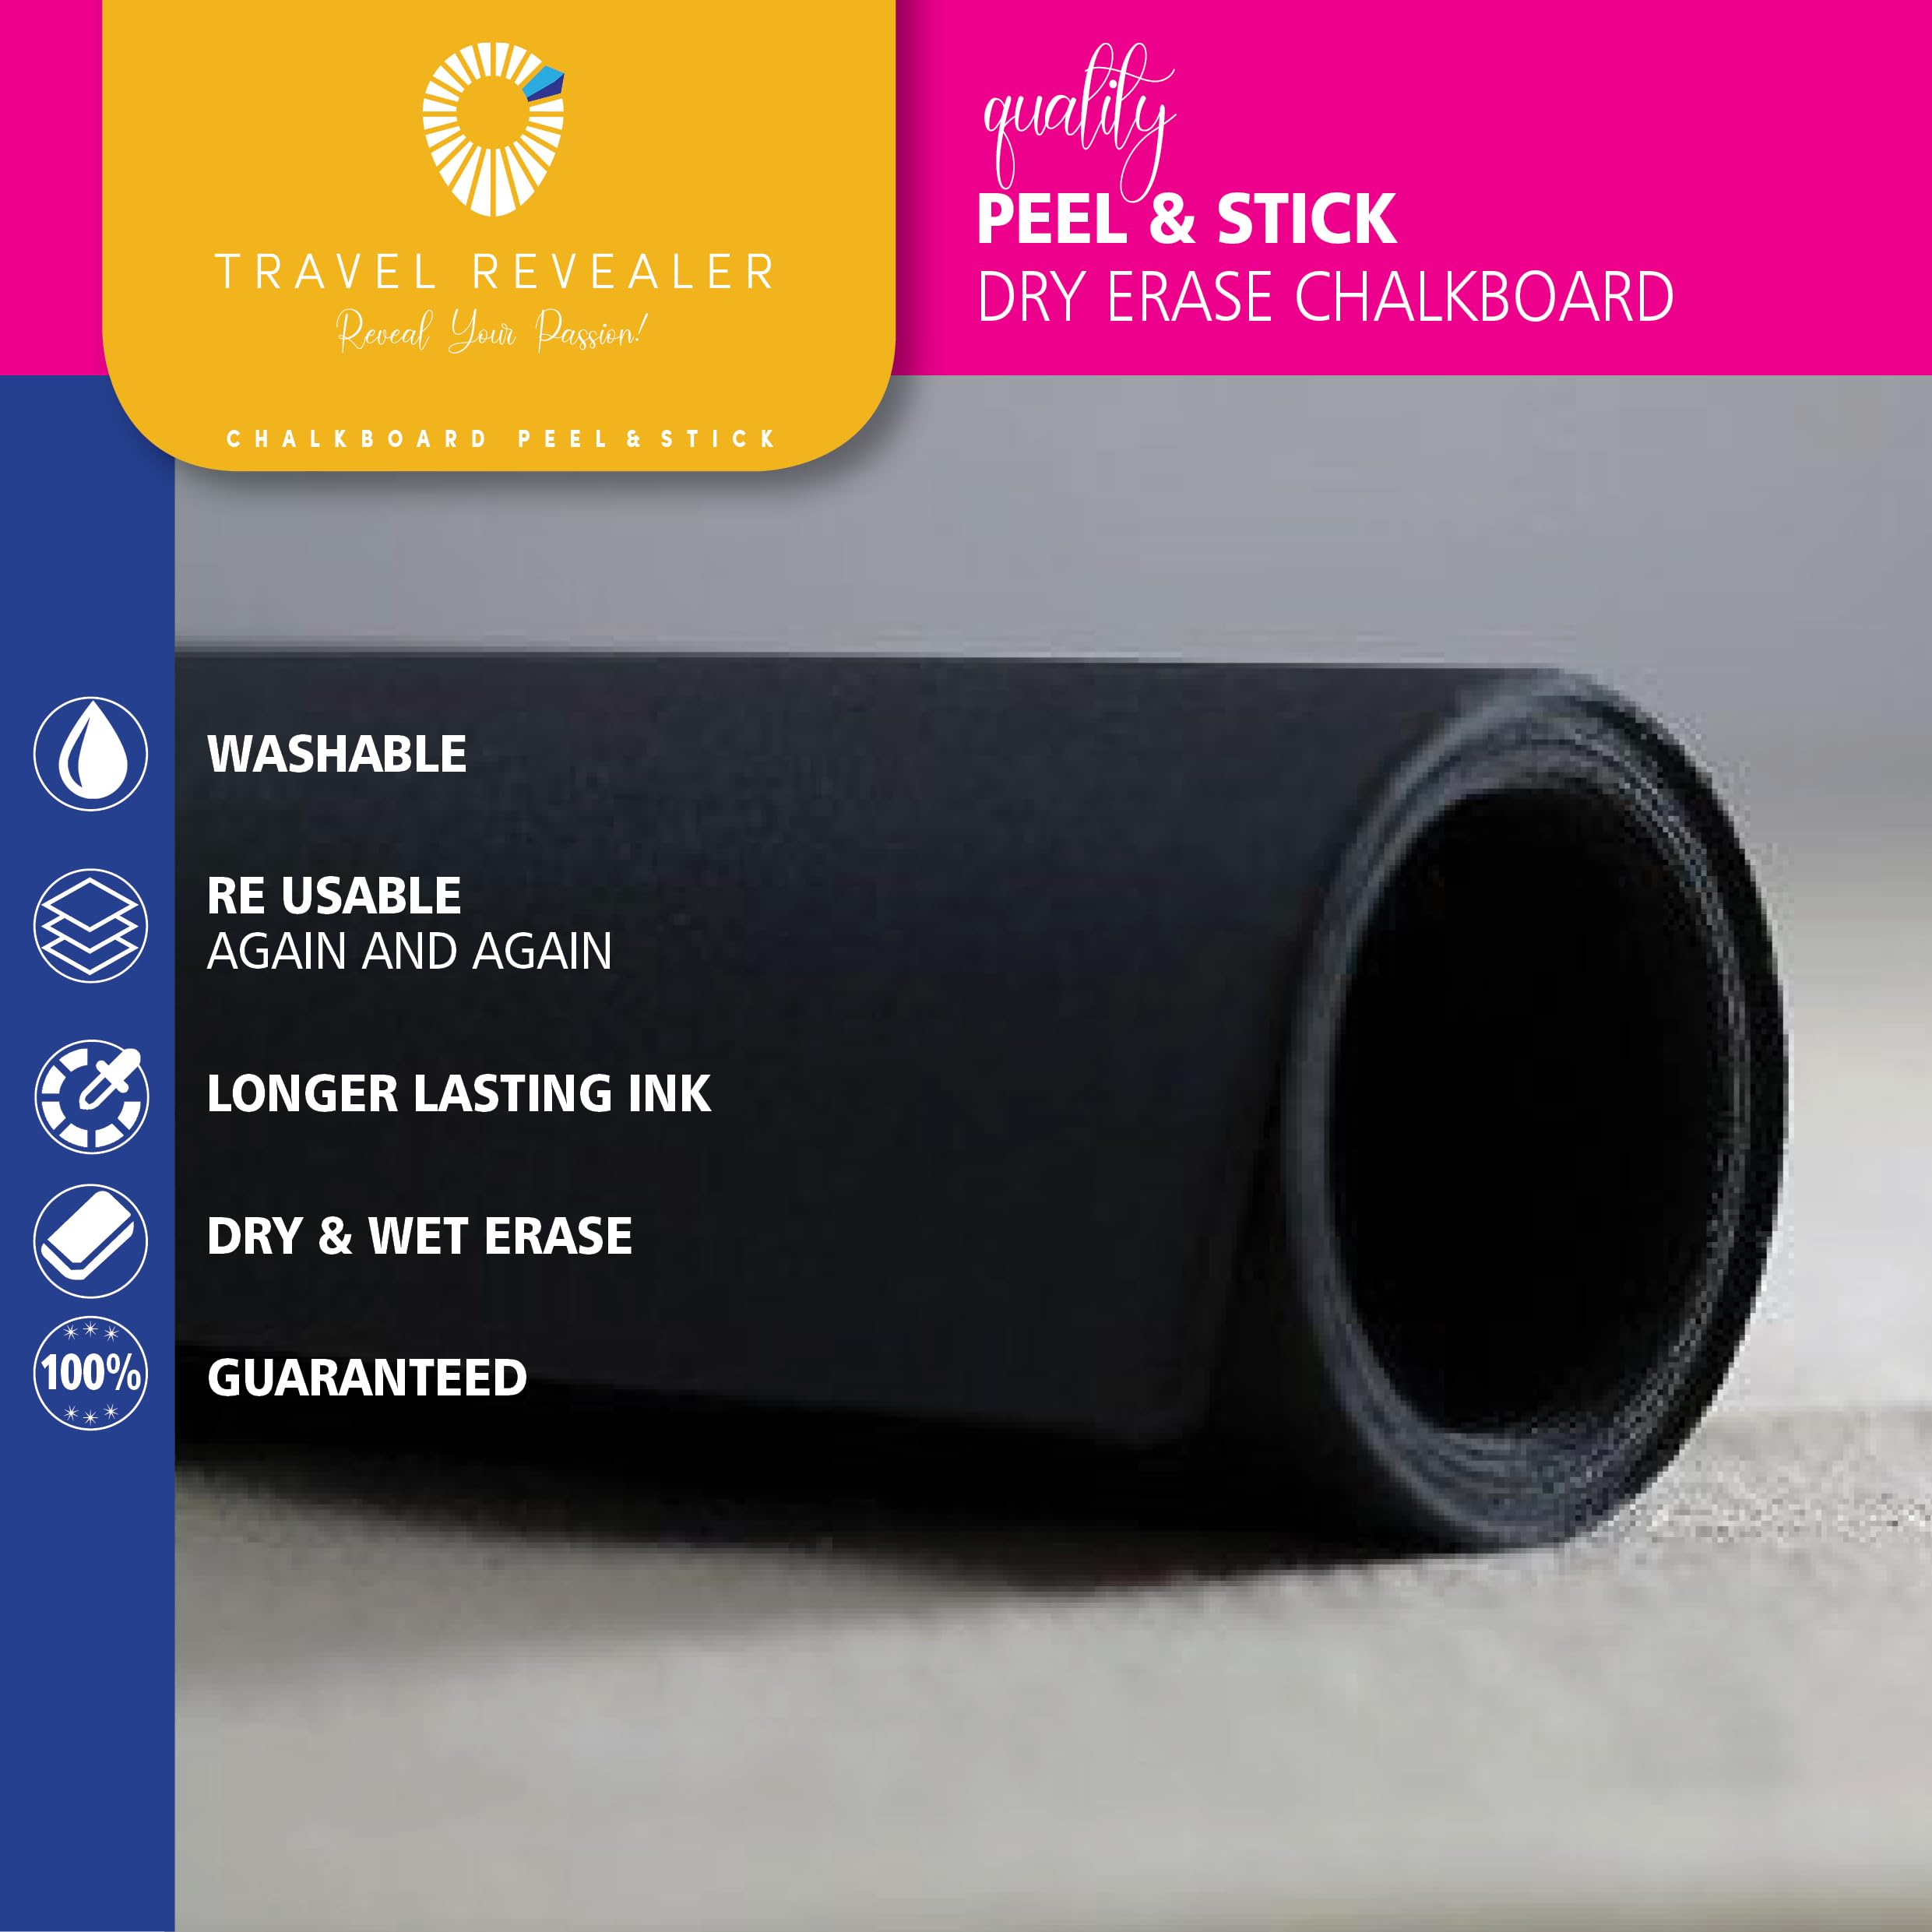 Travel Revealer Chalkboard Contact Paper Self Adhesive Dry Erase Contact Paper Roll +3 Liquid Chalk Markers 17.7x78.7 Wallpaper Stick & Peel Removable Contact Paper Blackboard Vinyl Black Stickers